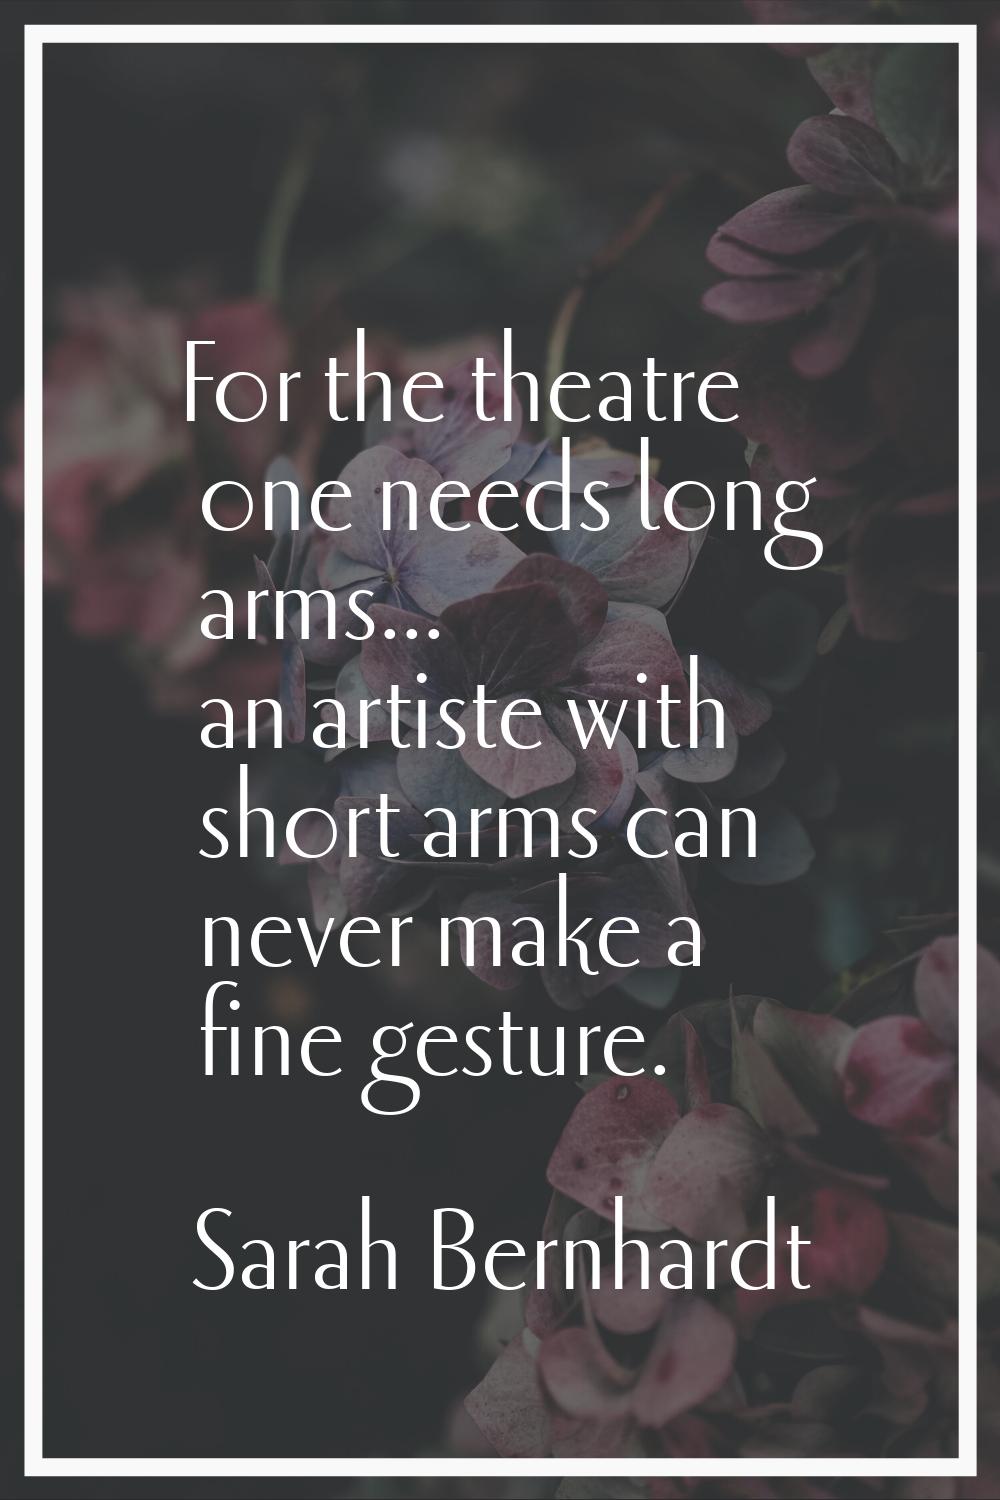 For the theatre one needs long arms... an artiste with short arms can never make a fine gesture.